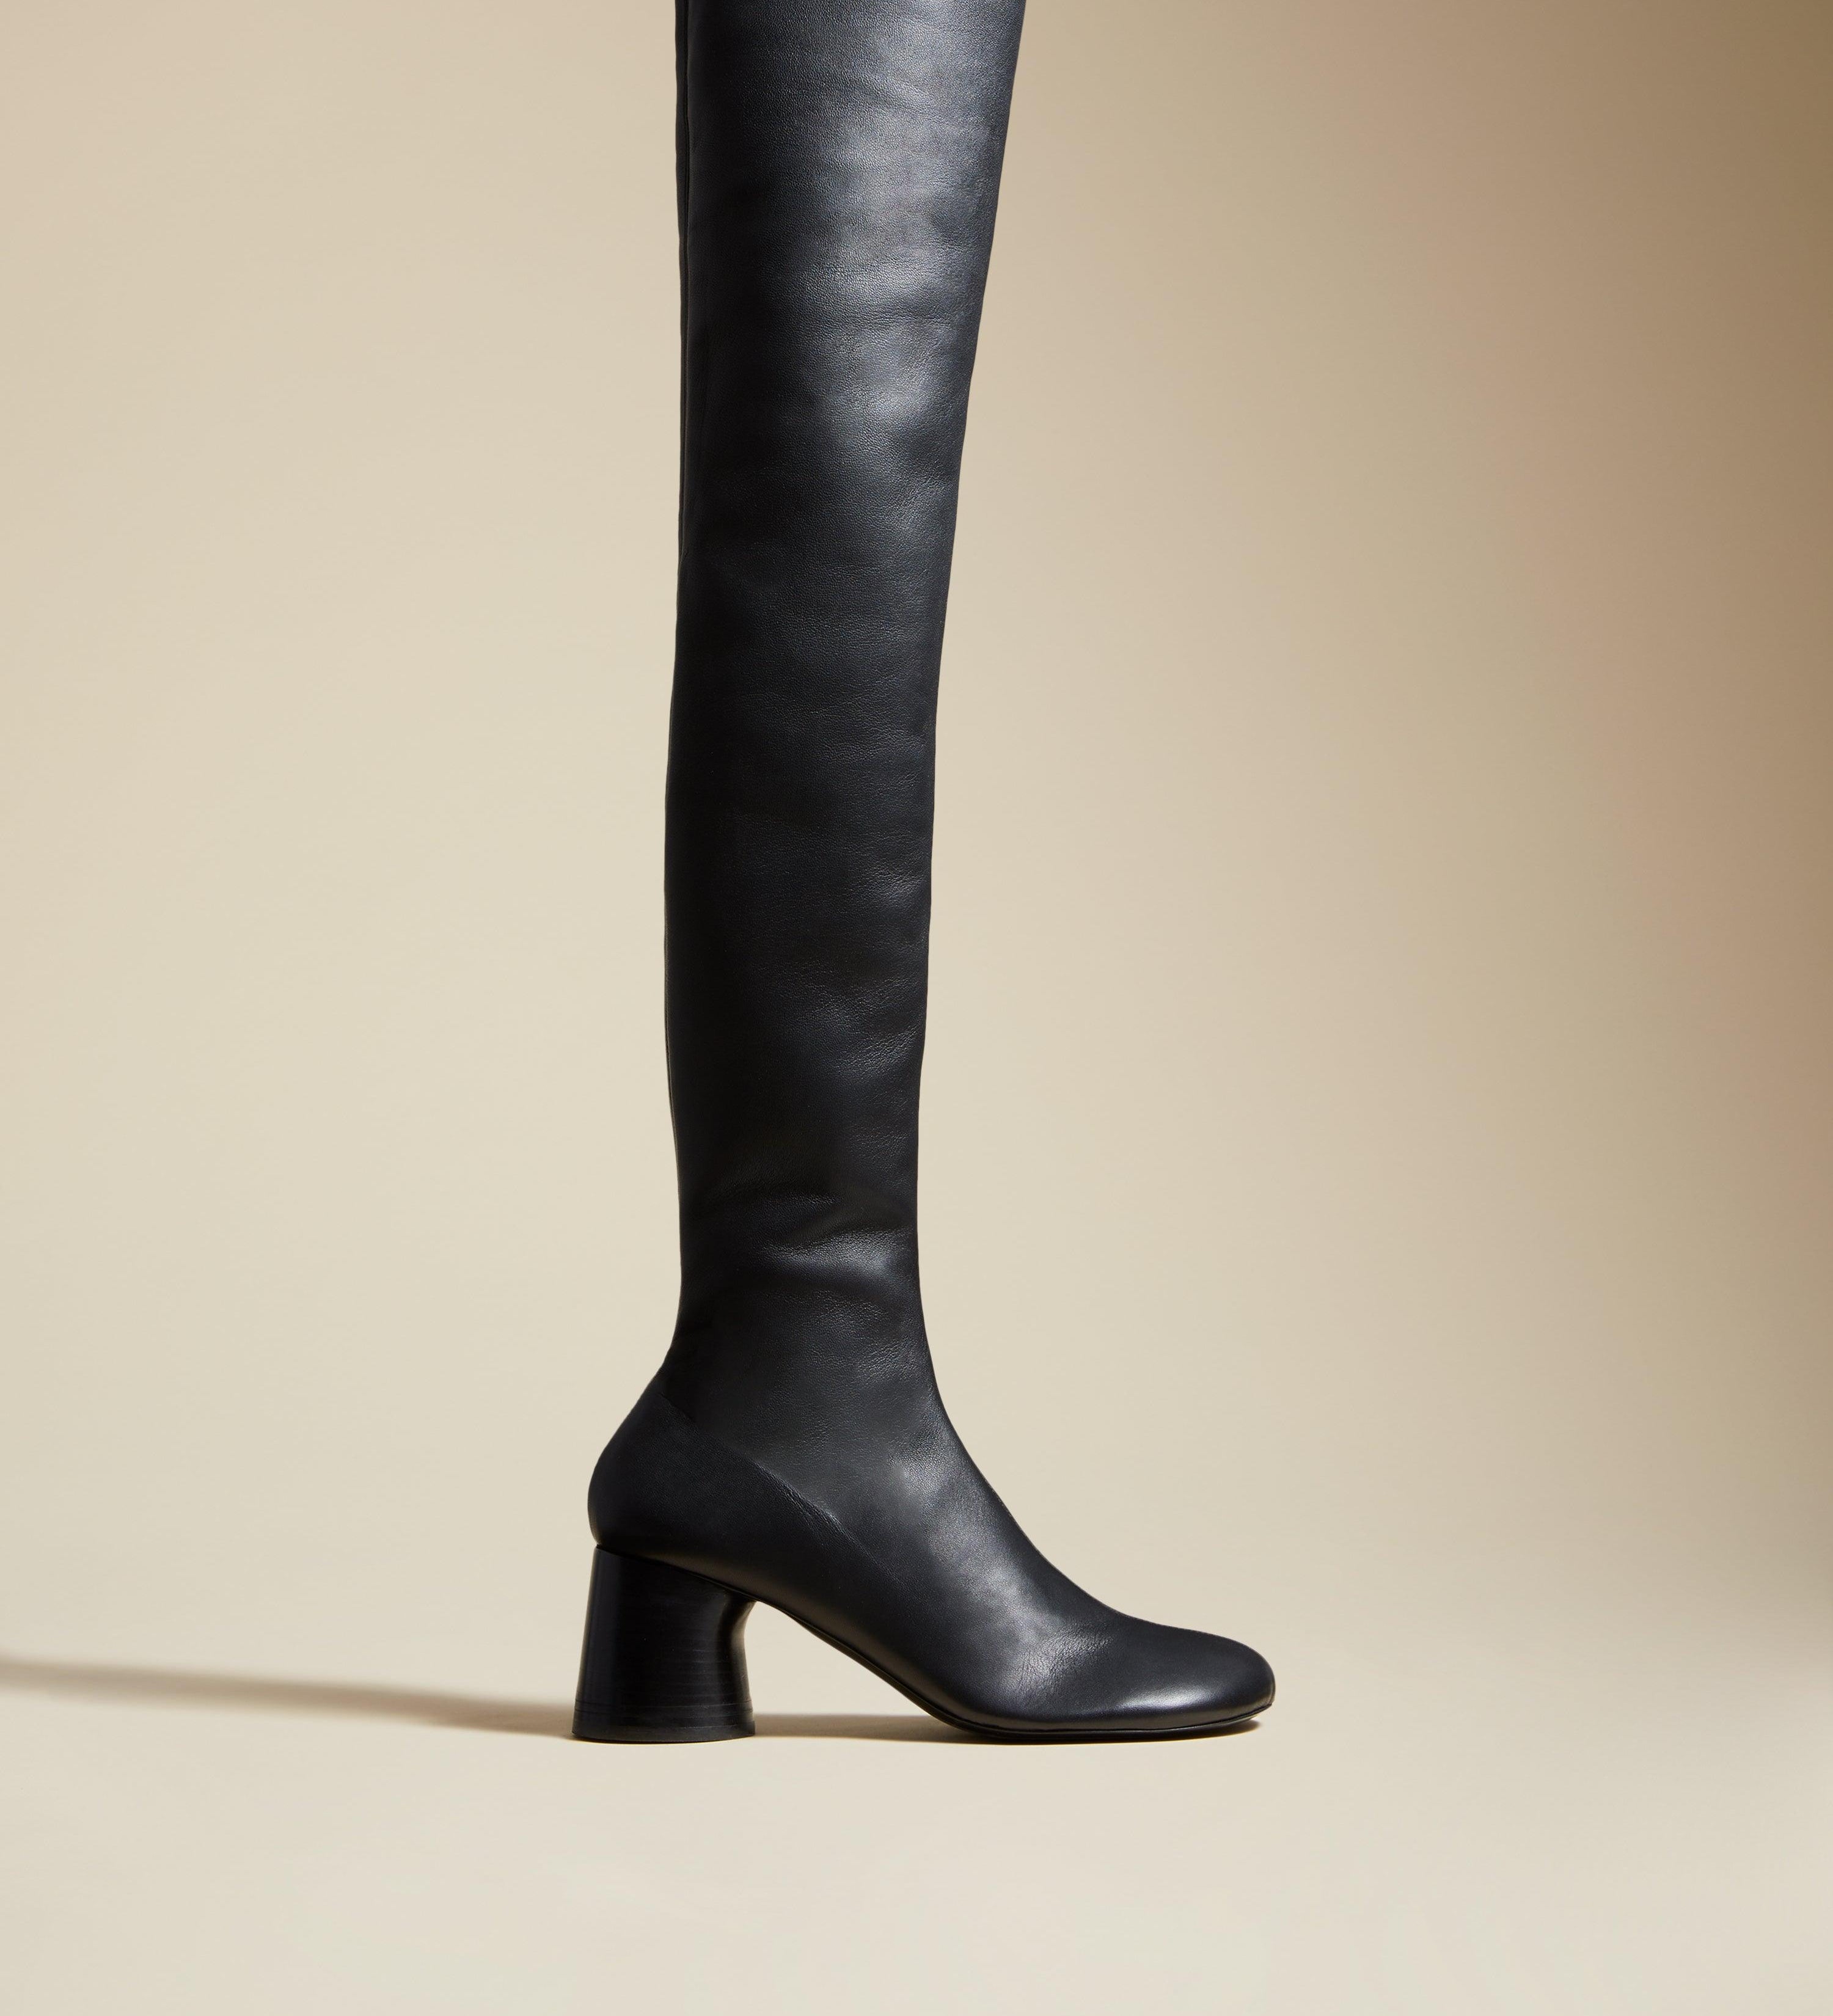 The Admiral Over-the-Knee Boot in Black Leather - The Iconic Issue